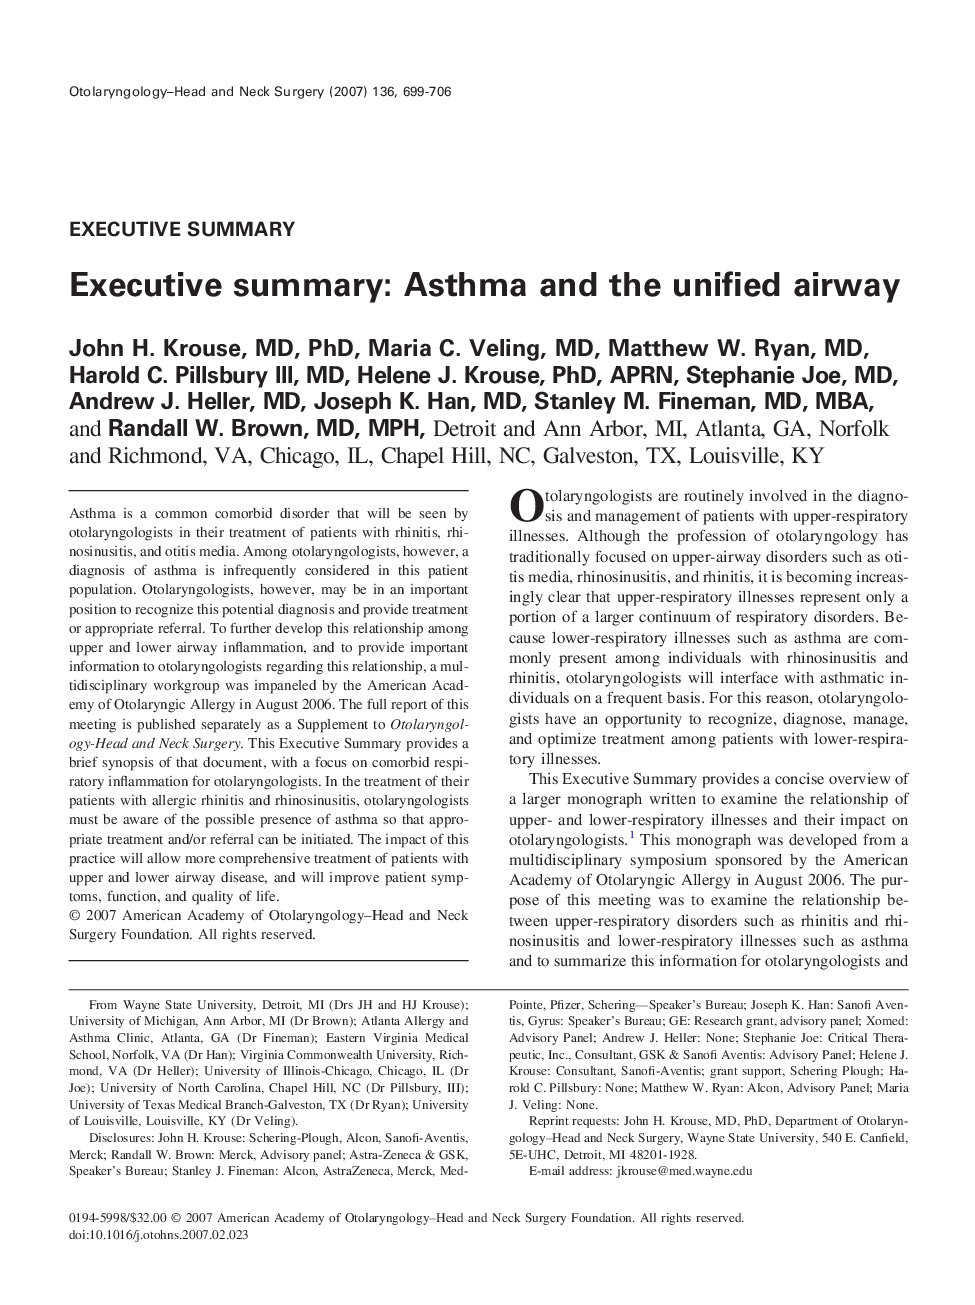 Executive summary: Asthma and the unified airway